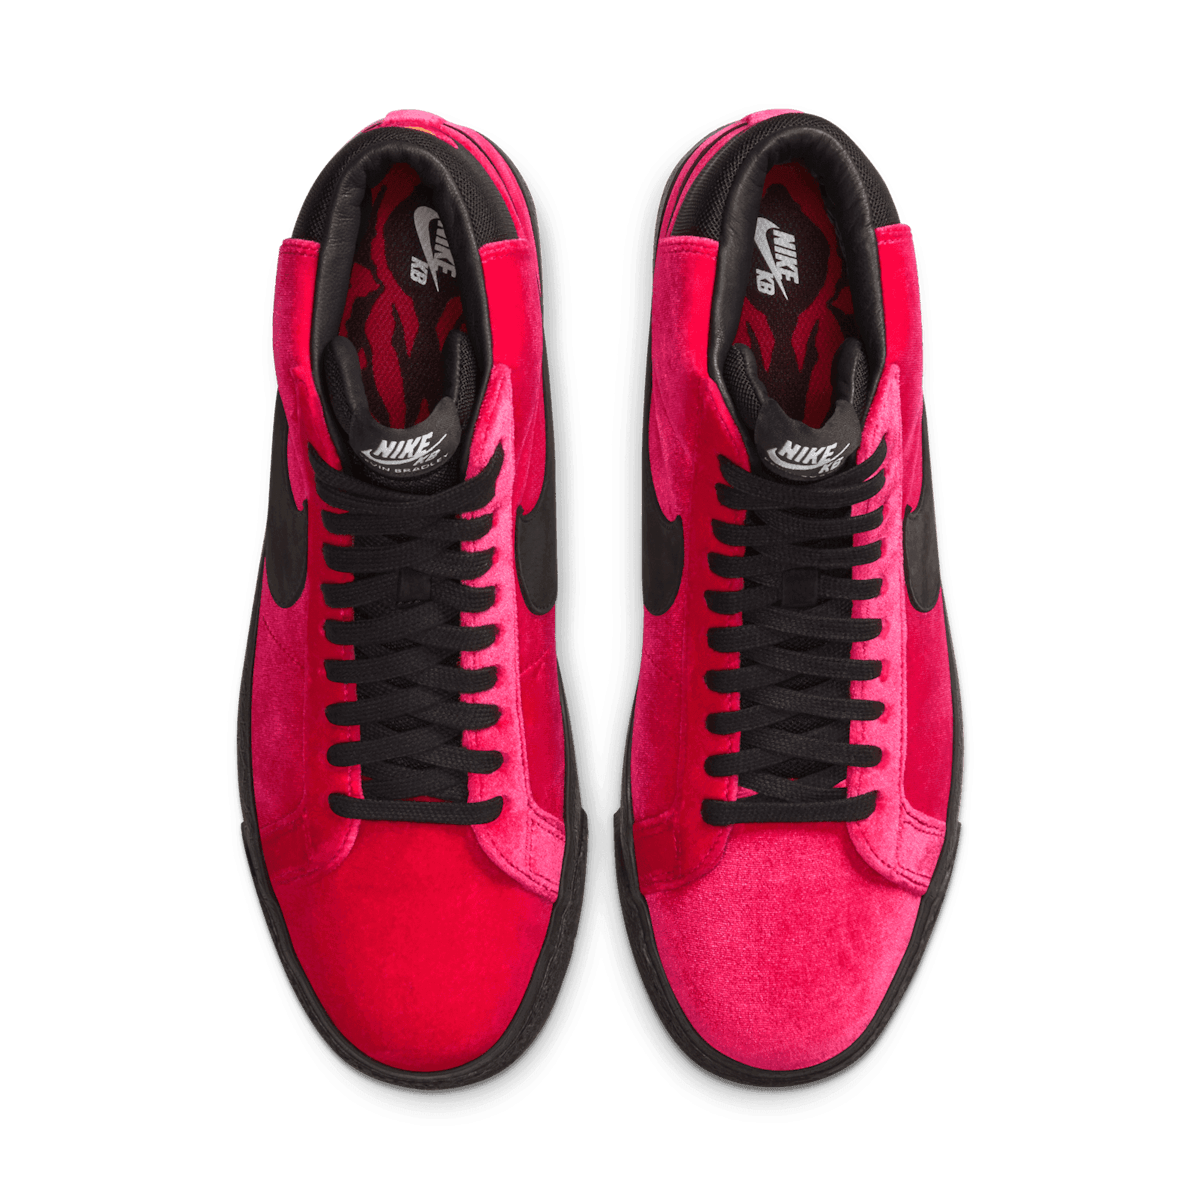 Nike SB Zoom Blazer Mid Kevin and Hell "Hell" Angle 1